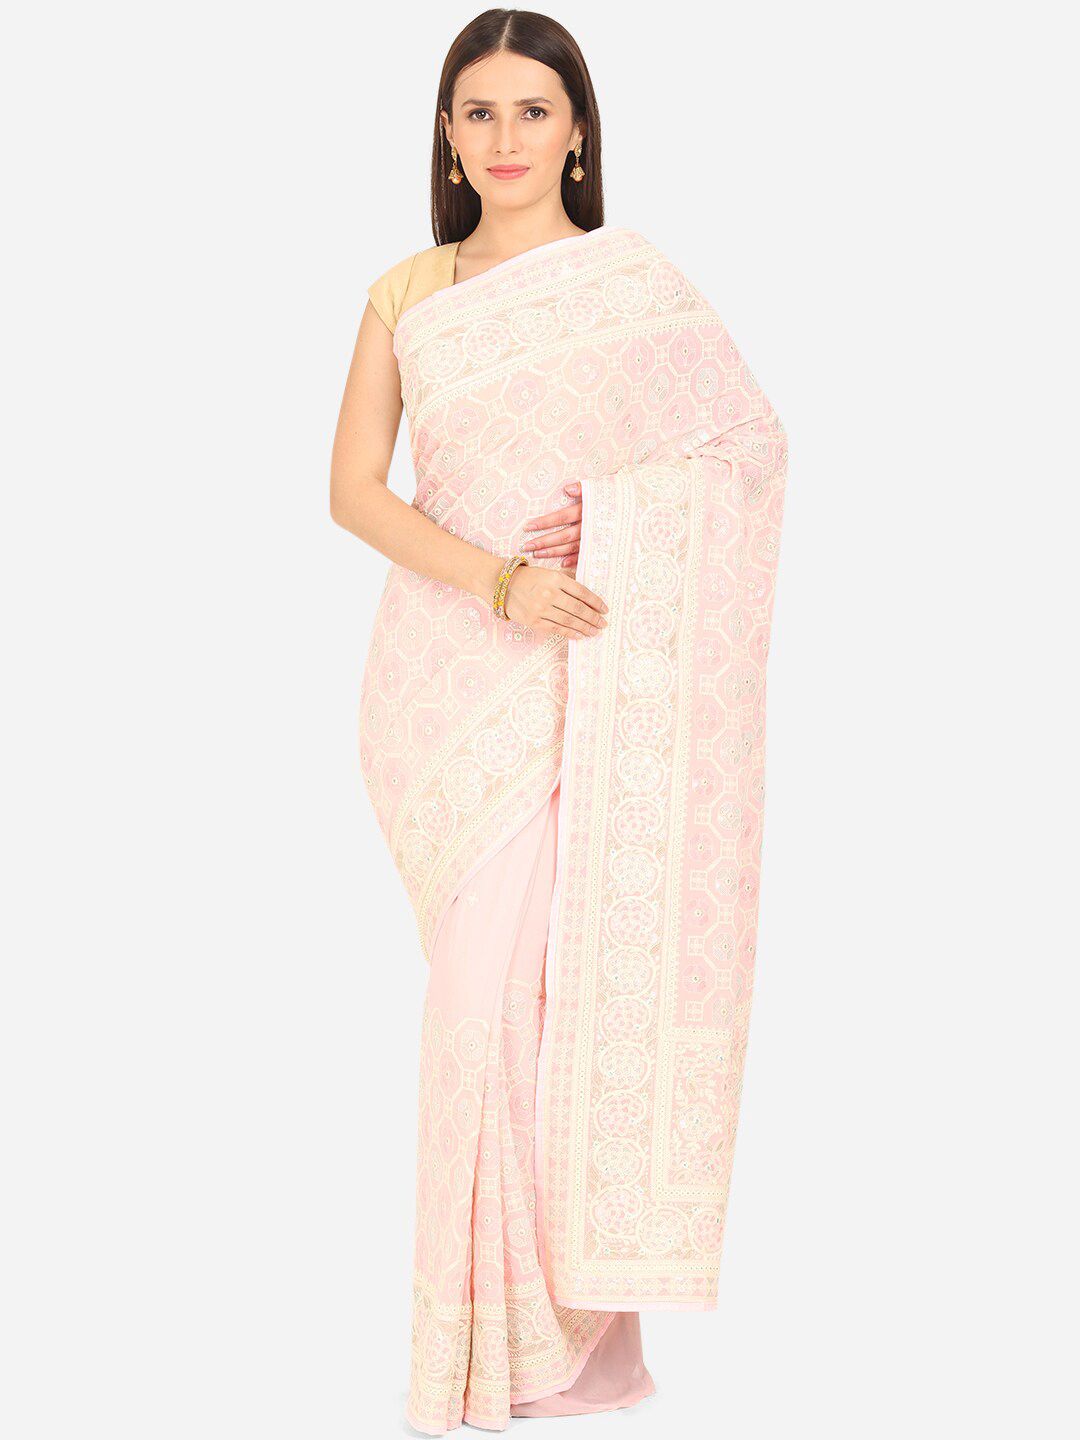 BOMBAY SELECTIONS Pink & Off White Ethnic Motifs Embroidered Saree Price in India